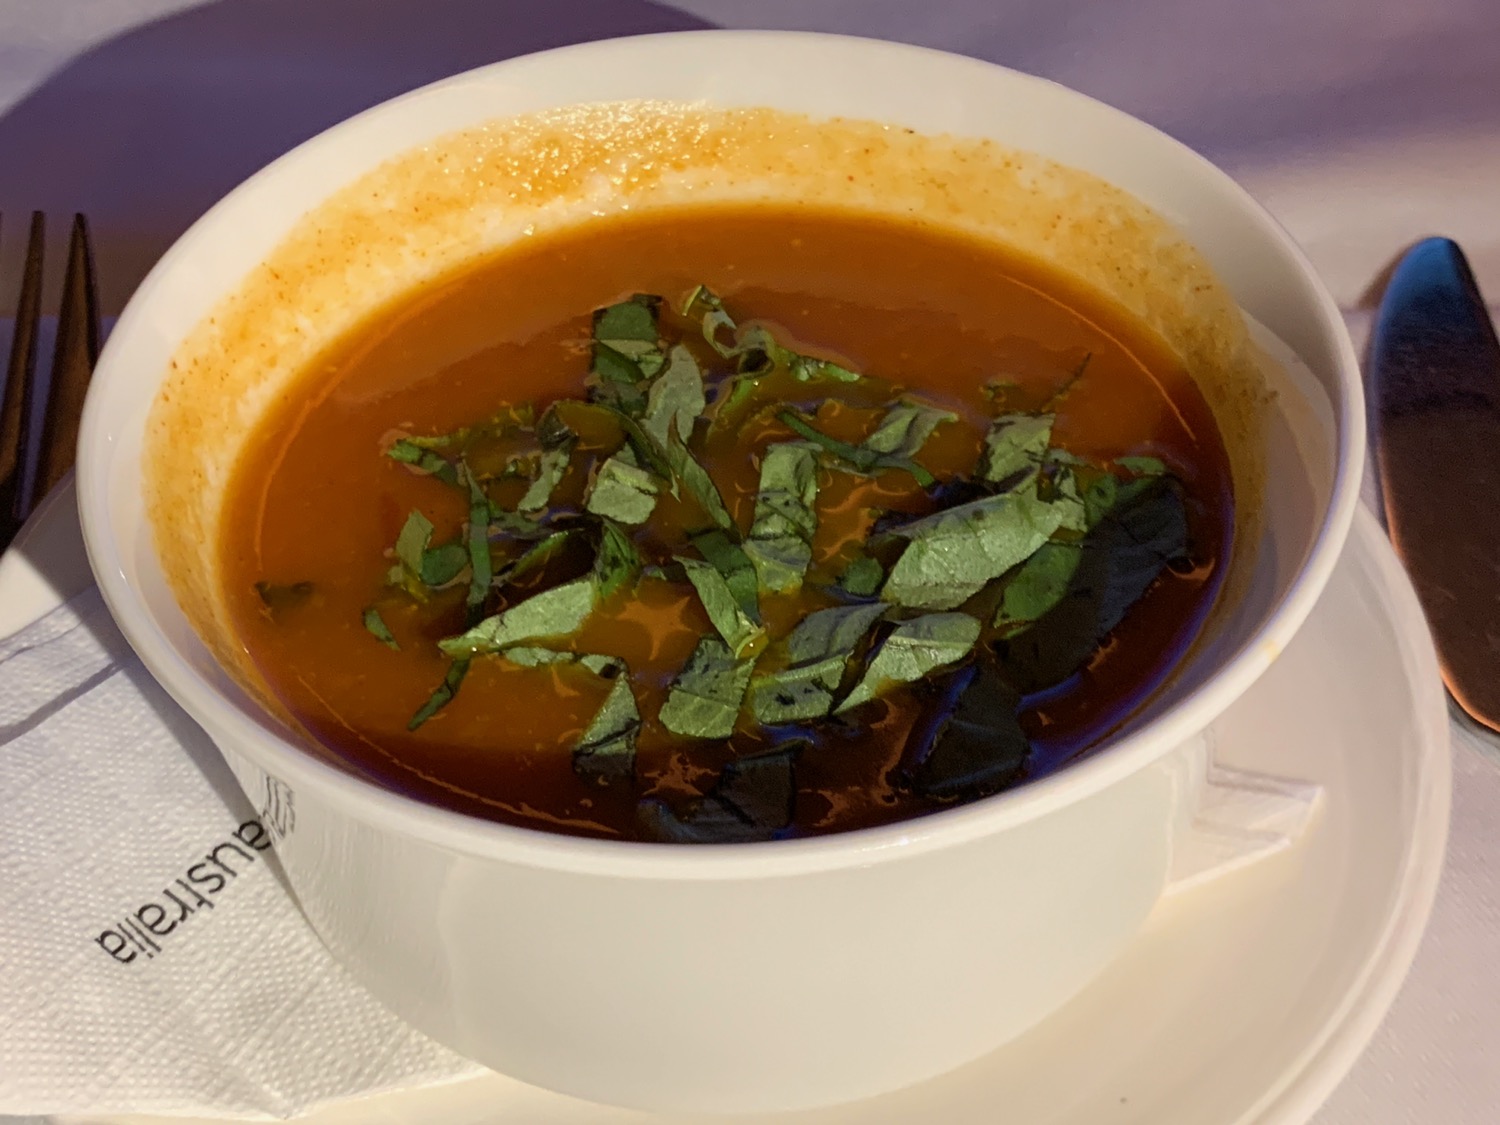 a bowl of soup with herbs in it